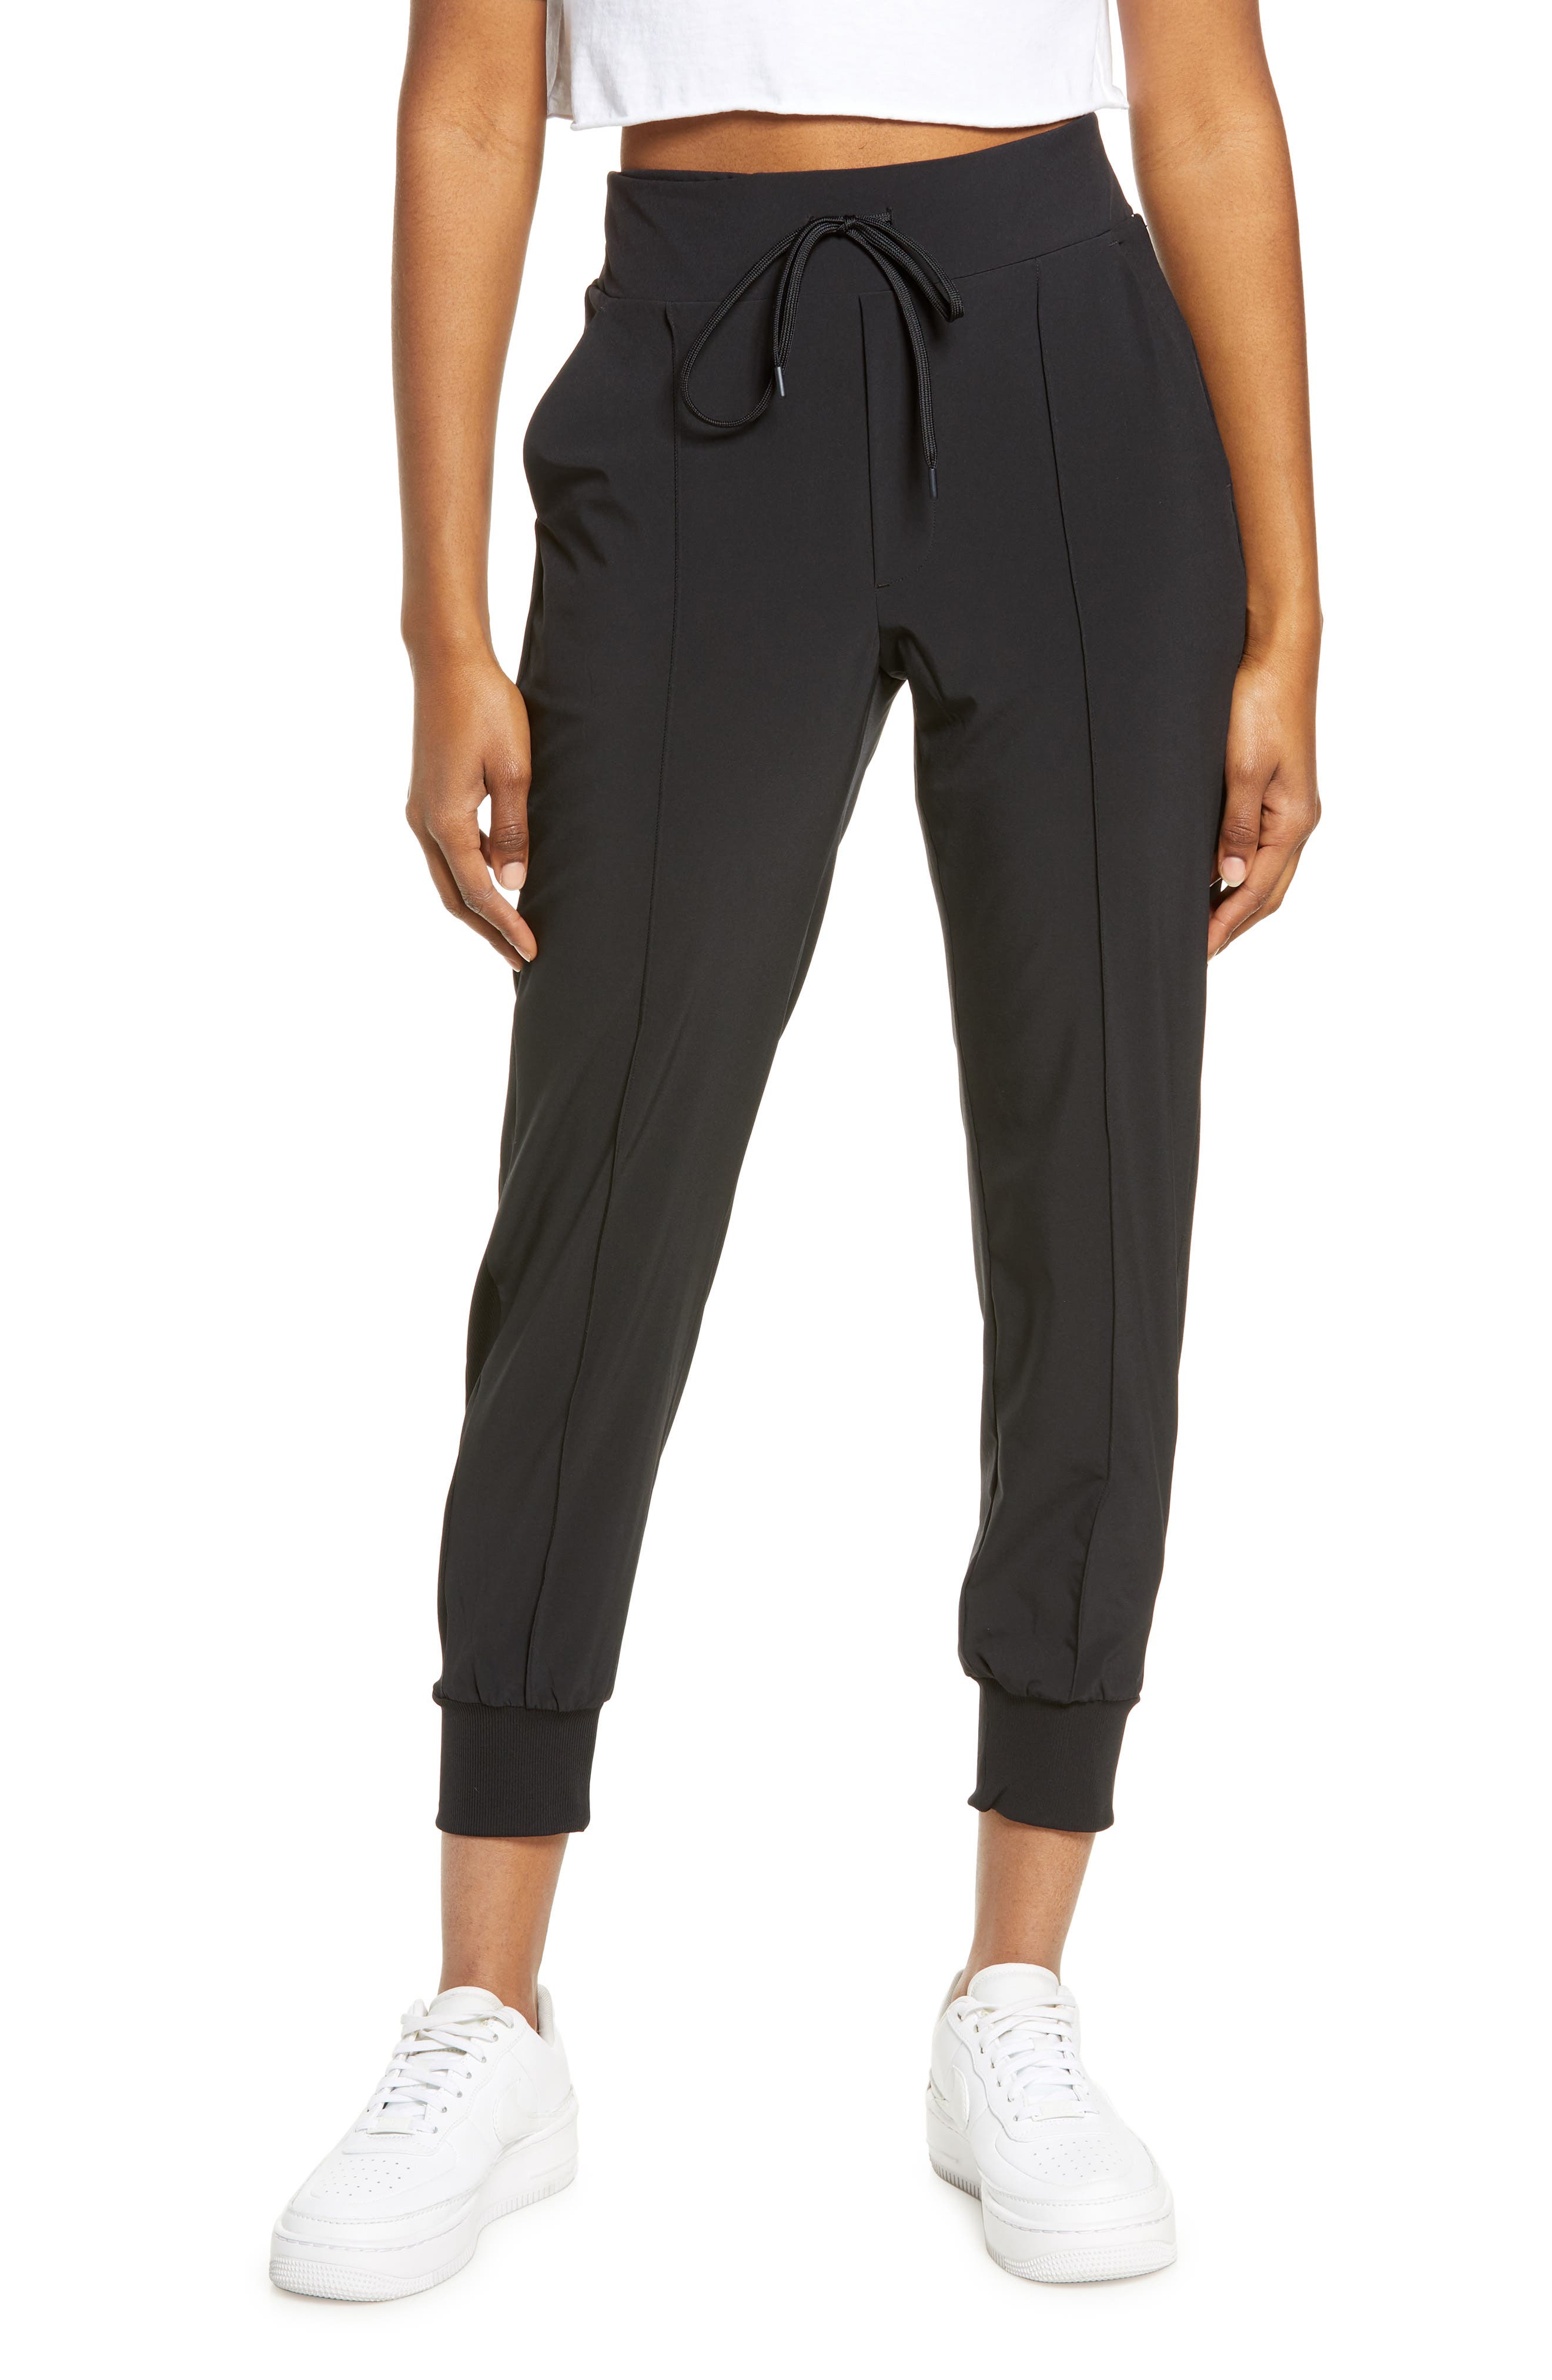 OPALOS Womens Runing Sweatpant with Pockets Drawstring Casual Activewear Trousers 